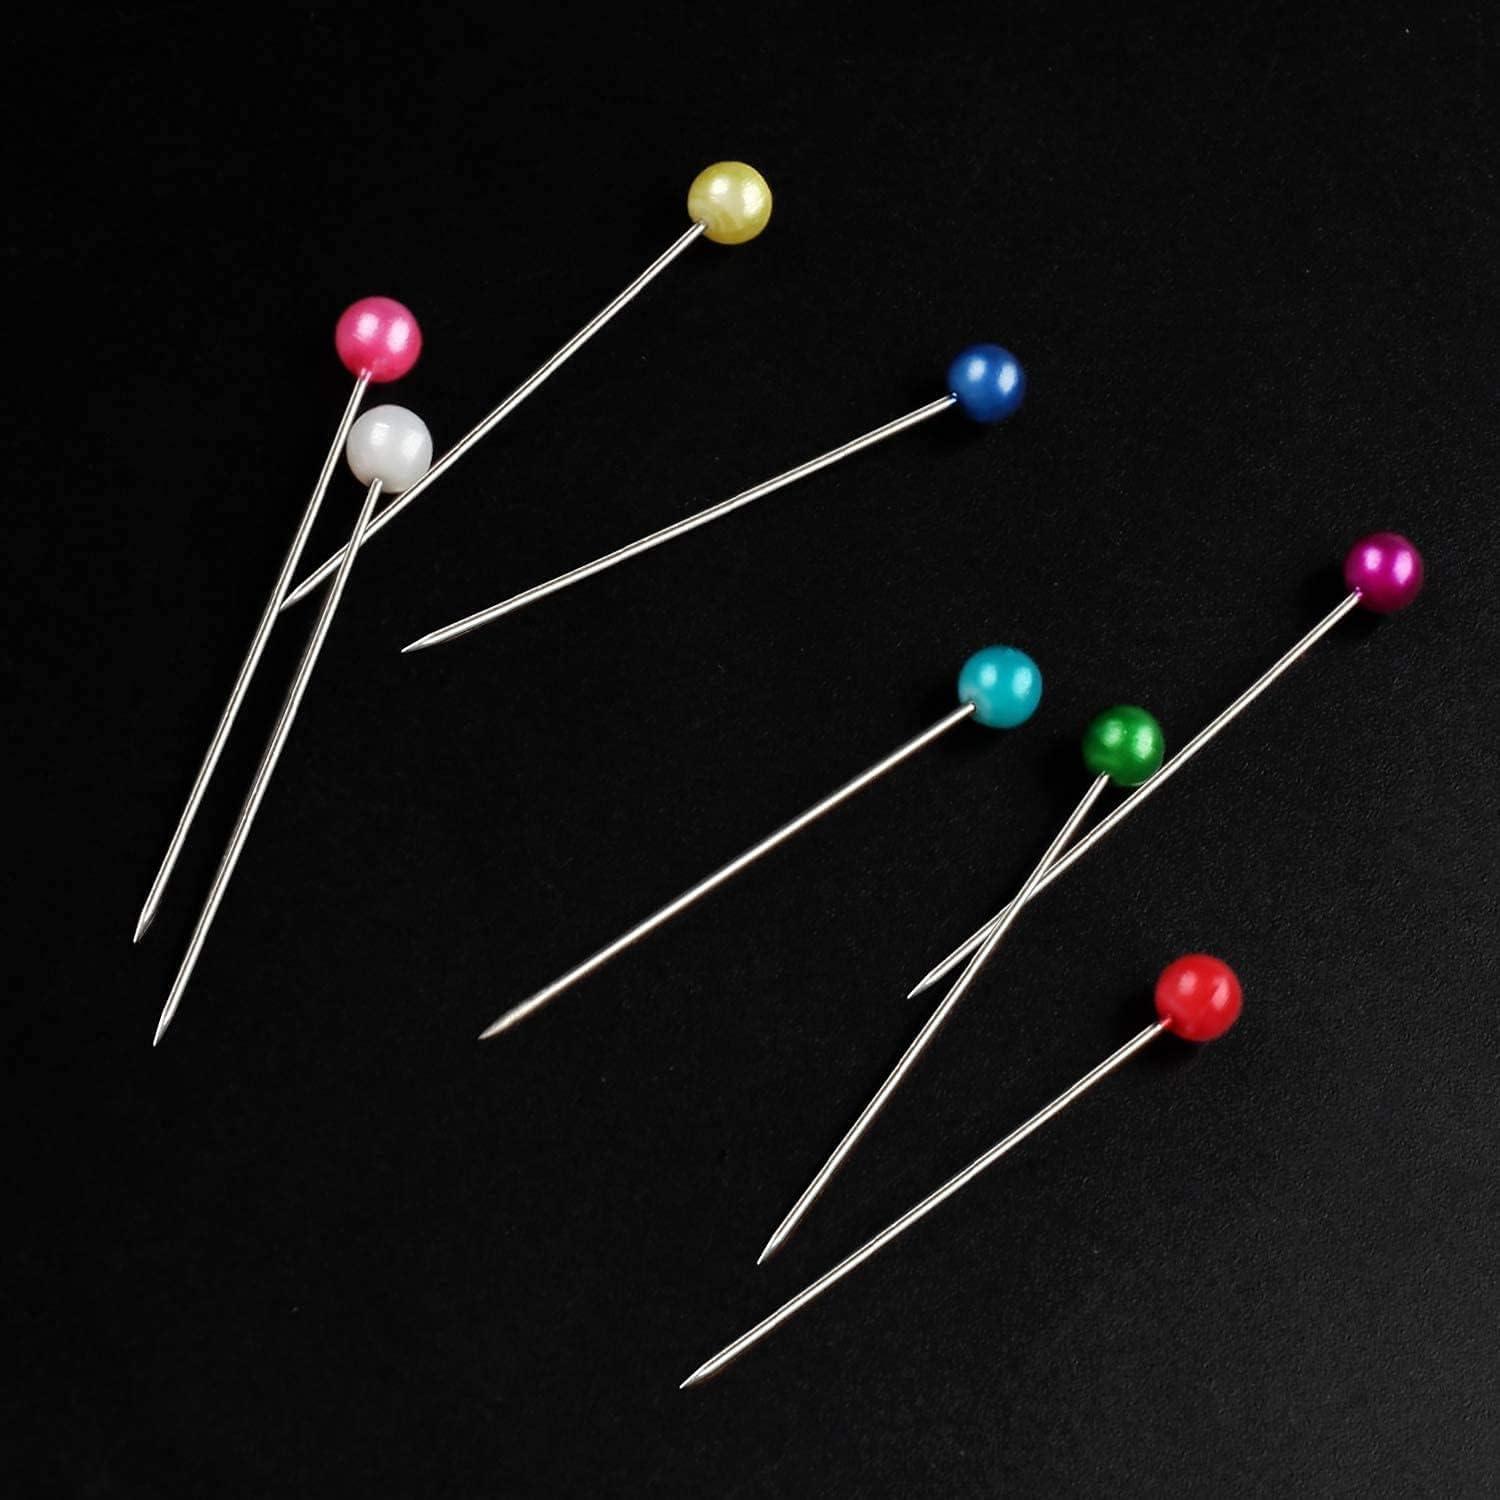 Sewing Pins 600 PCS Straight Pins 1.6 in Pearlized Ball Head Pins Sewing  Pins for Fabric DIY Sewing Pins Crafts